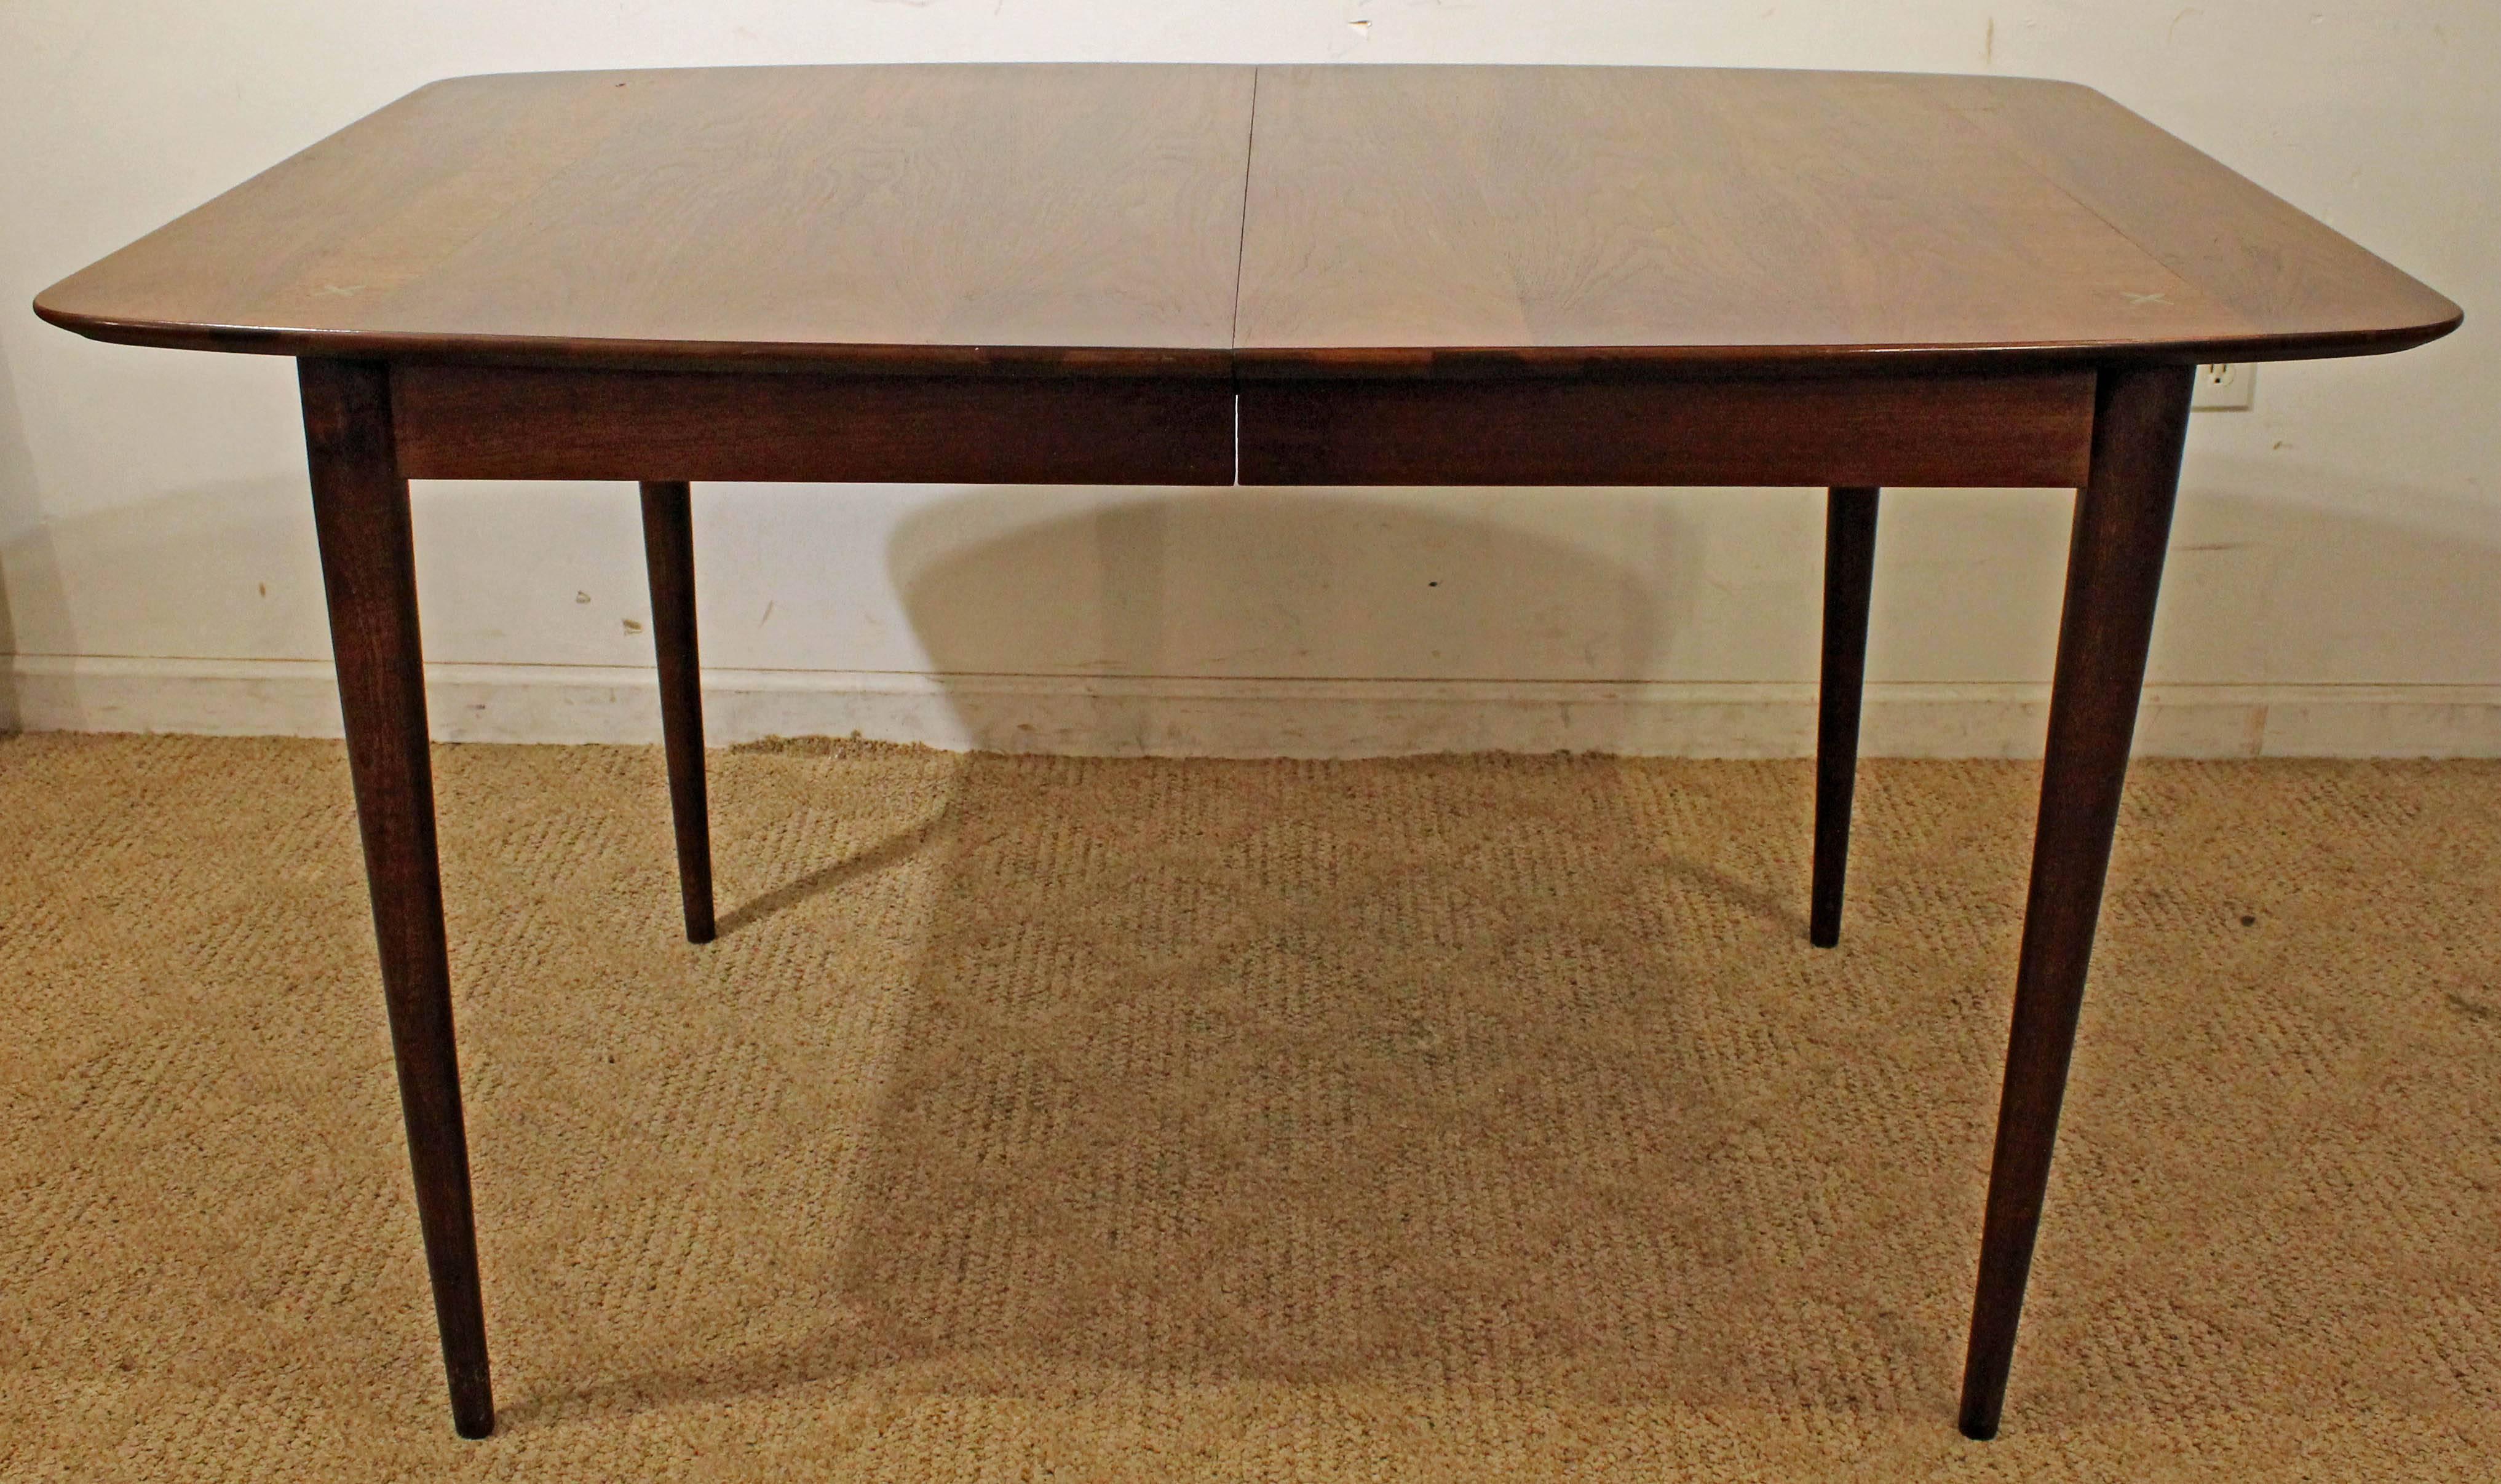 Offered is a Mid-Century Modern extendable dining table, made by American of Martinsville. Features beautiful walnut and inlay bands across each end along with the infamous aluminium X's on the corners. Includes two 12